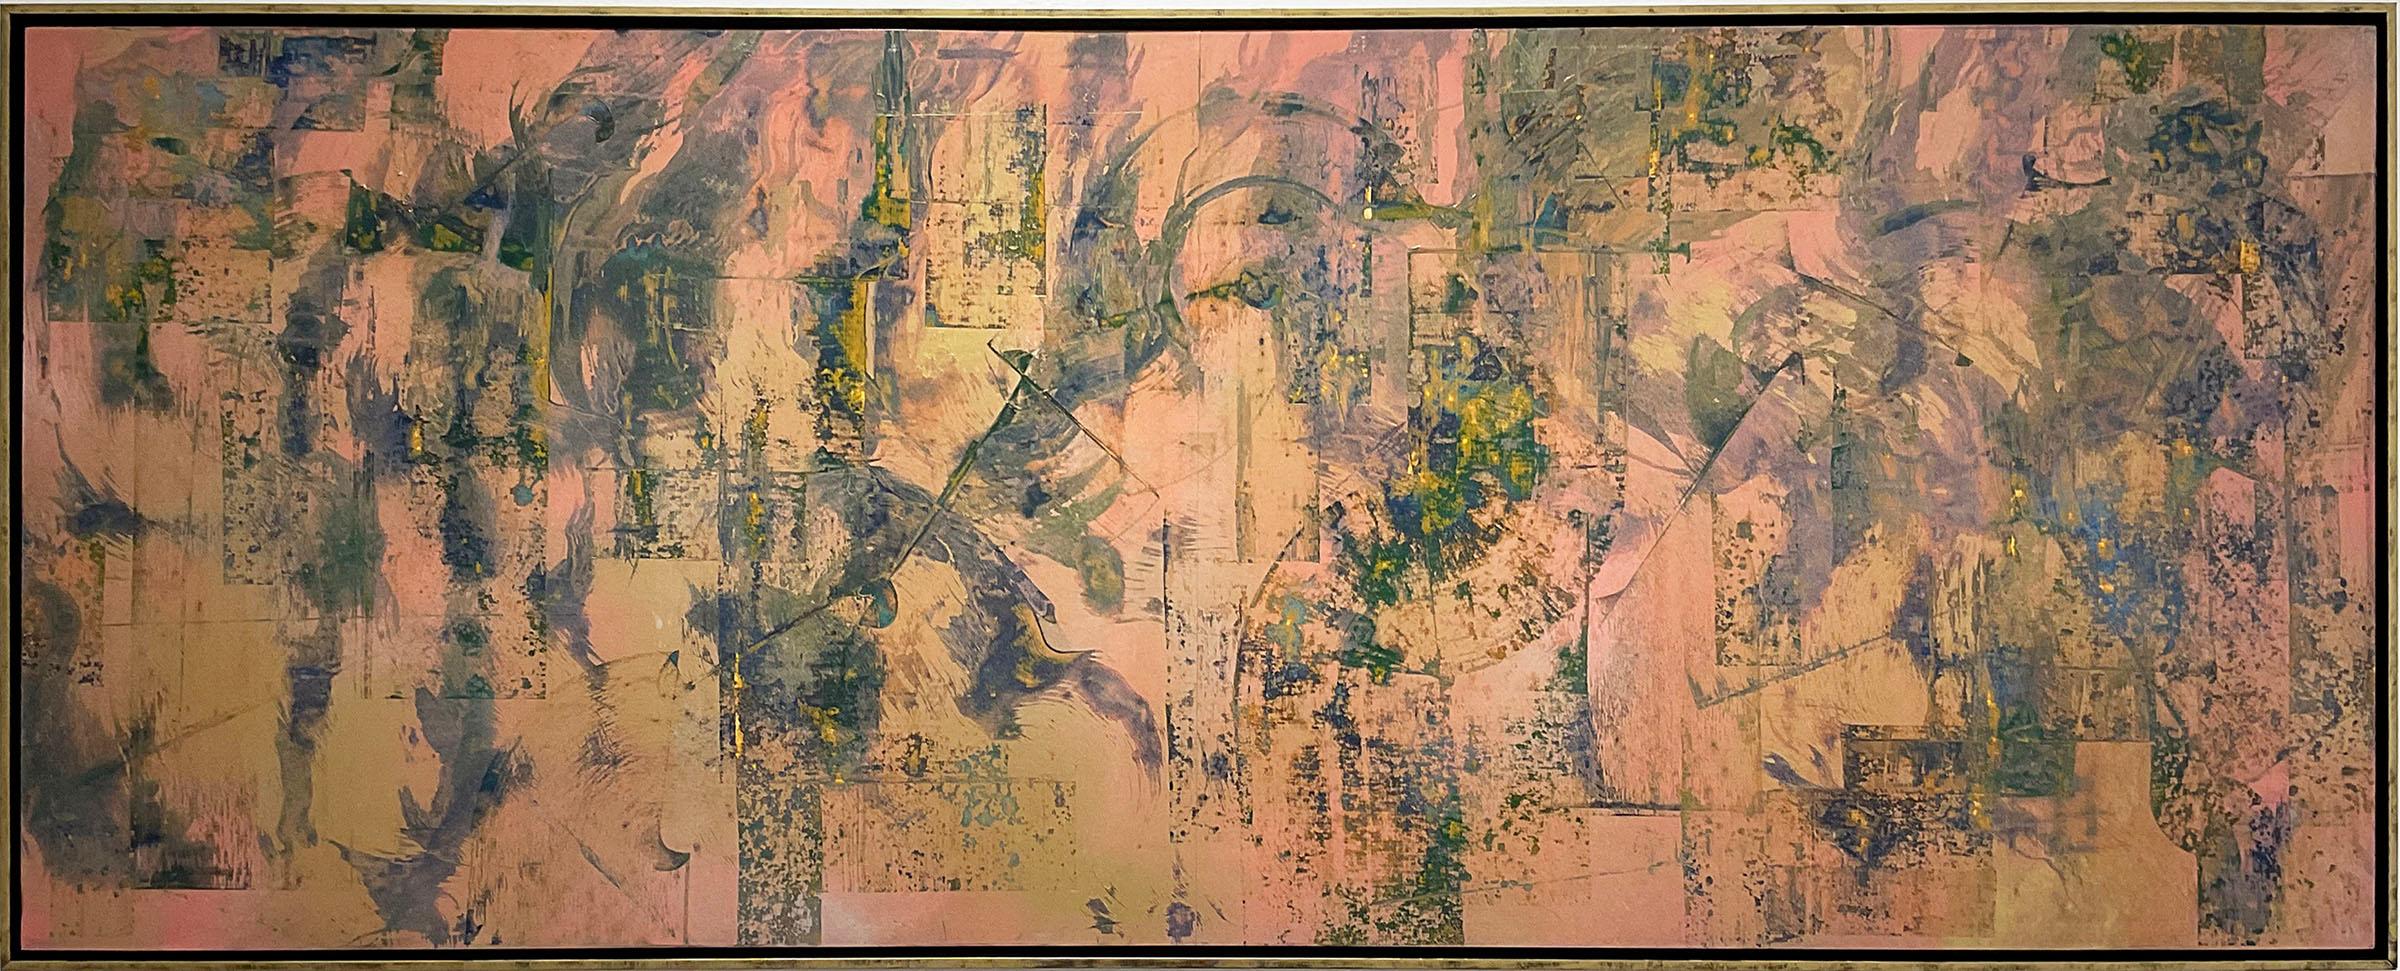 Bruce Murphy Abstract Drawing - Beyond Mind and Matter: Peach & Gold Abstract Expressionist Painting